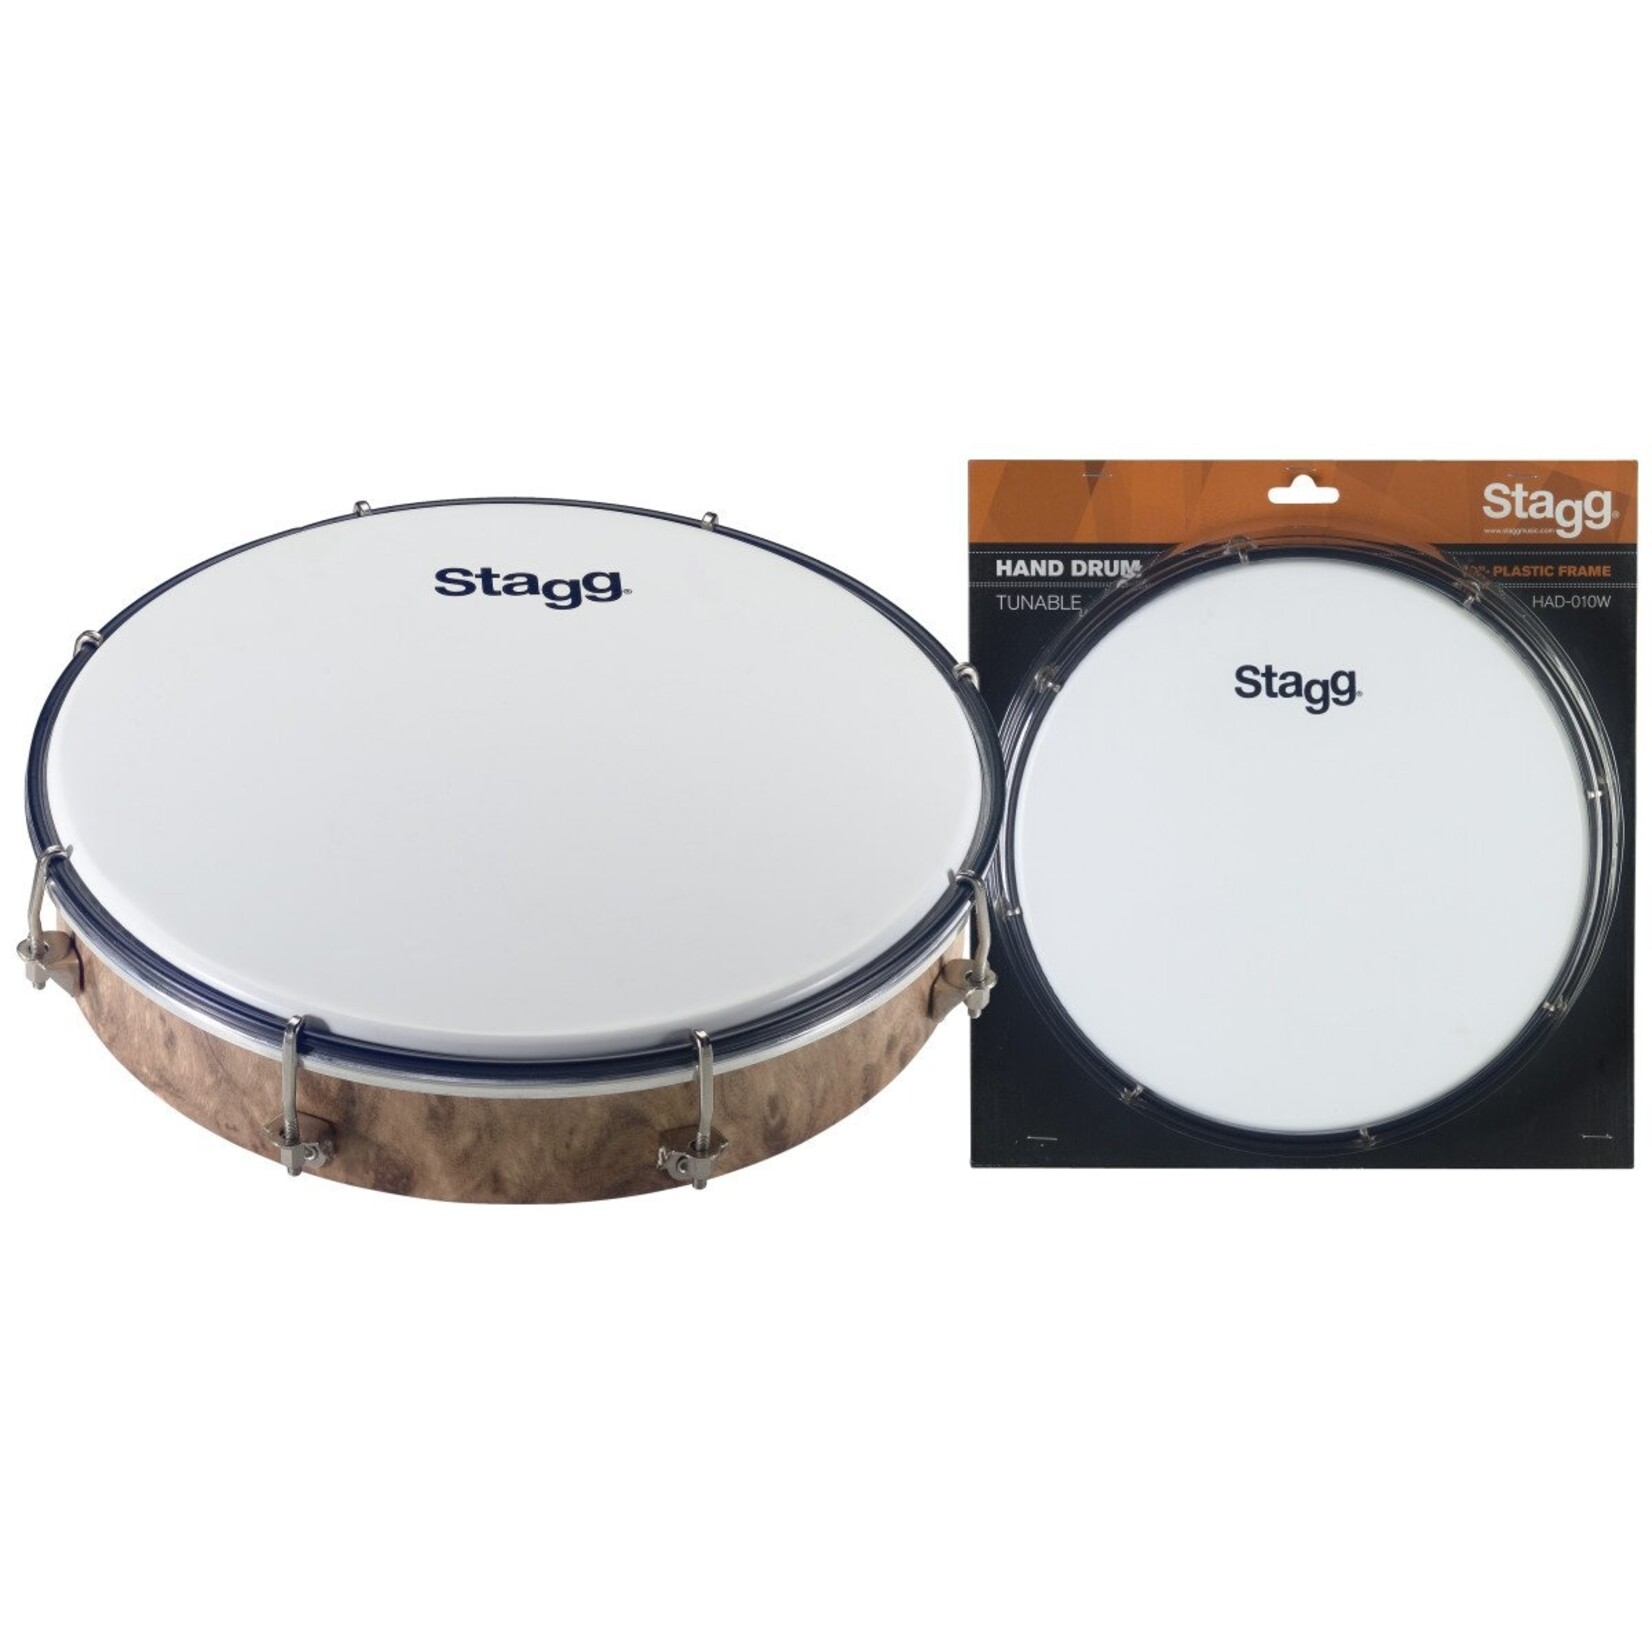 Stagg HAD-010W 10" Tunable Plastic Hand-Drum